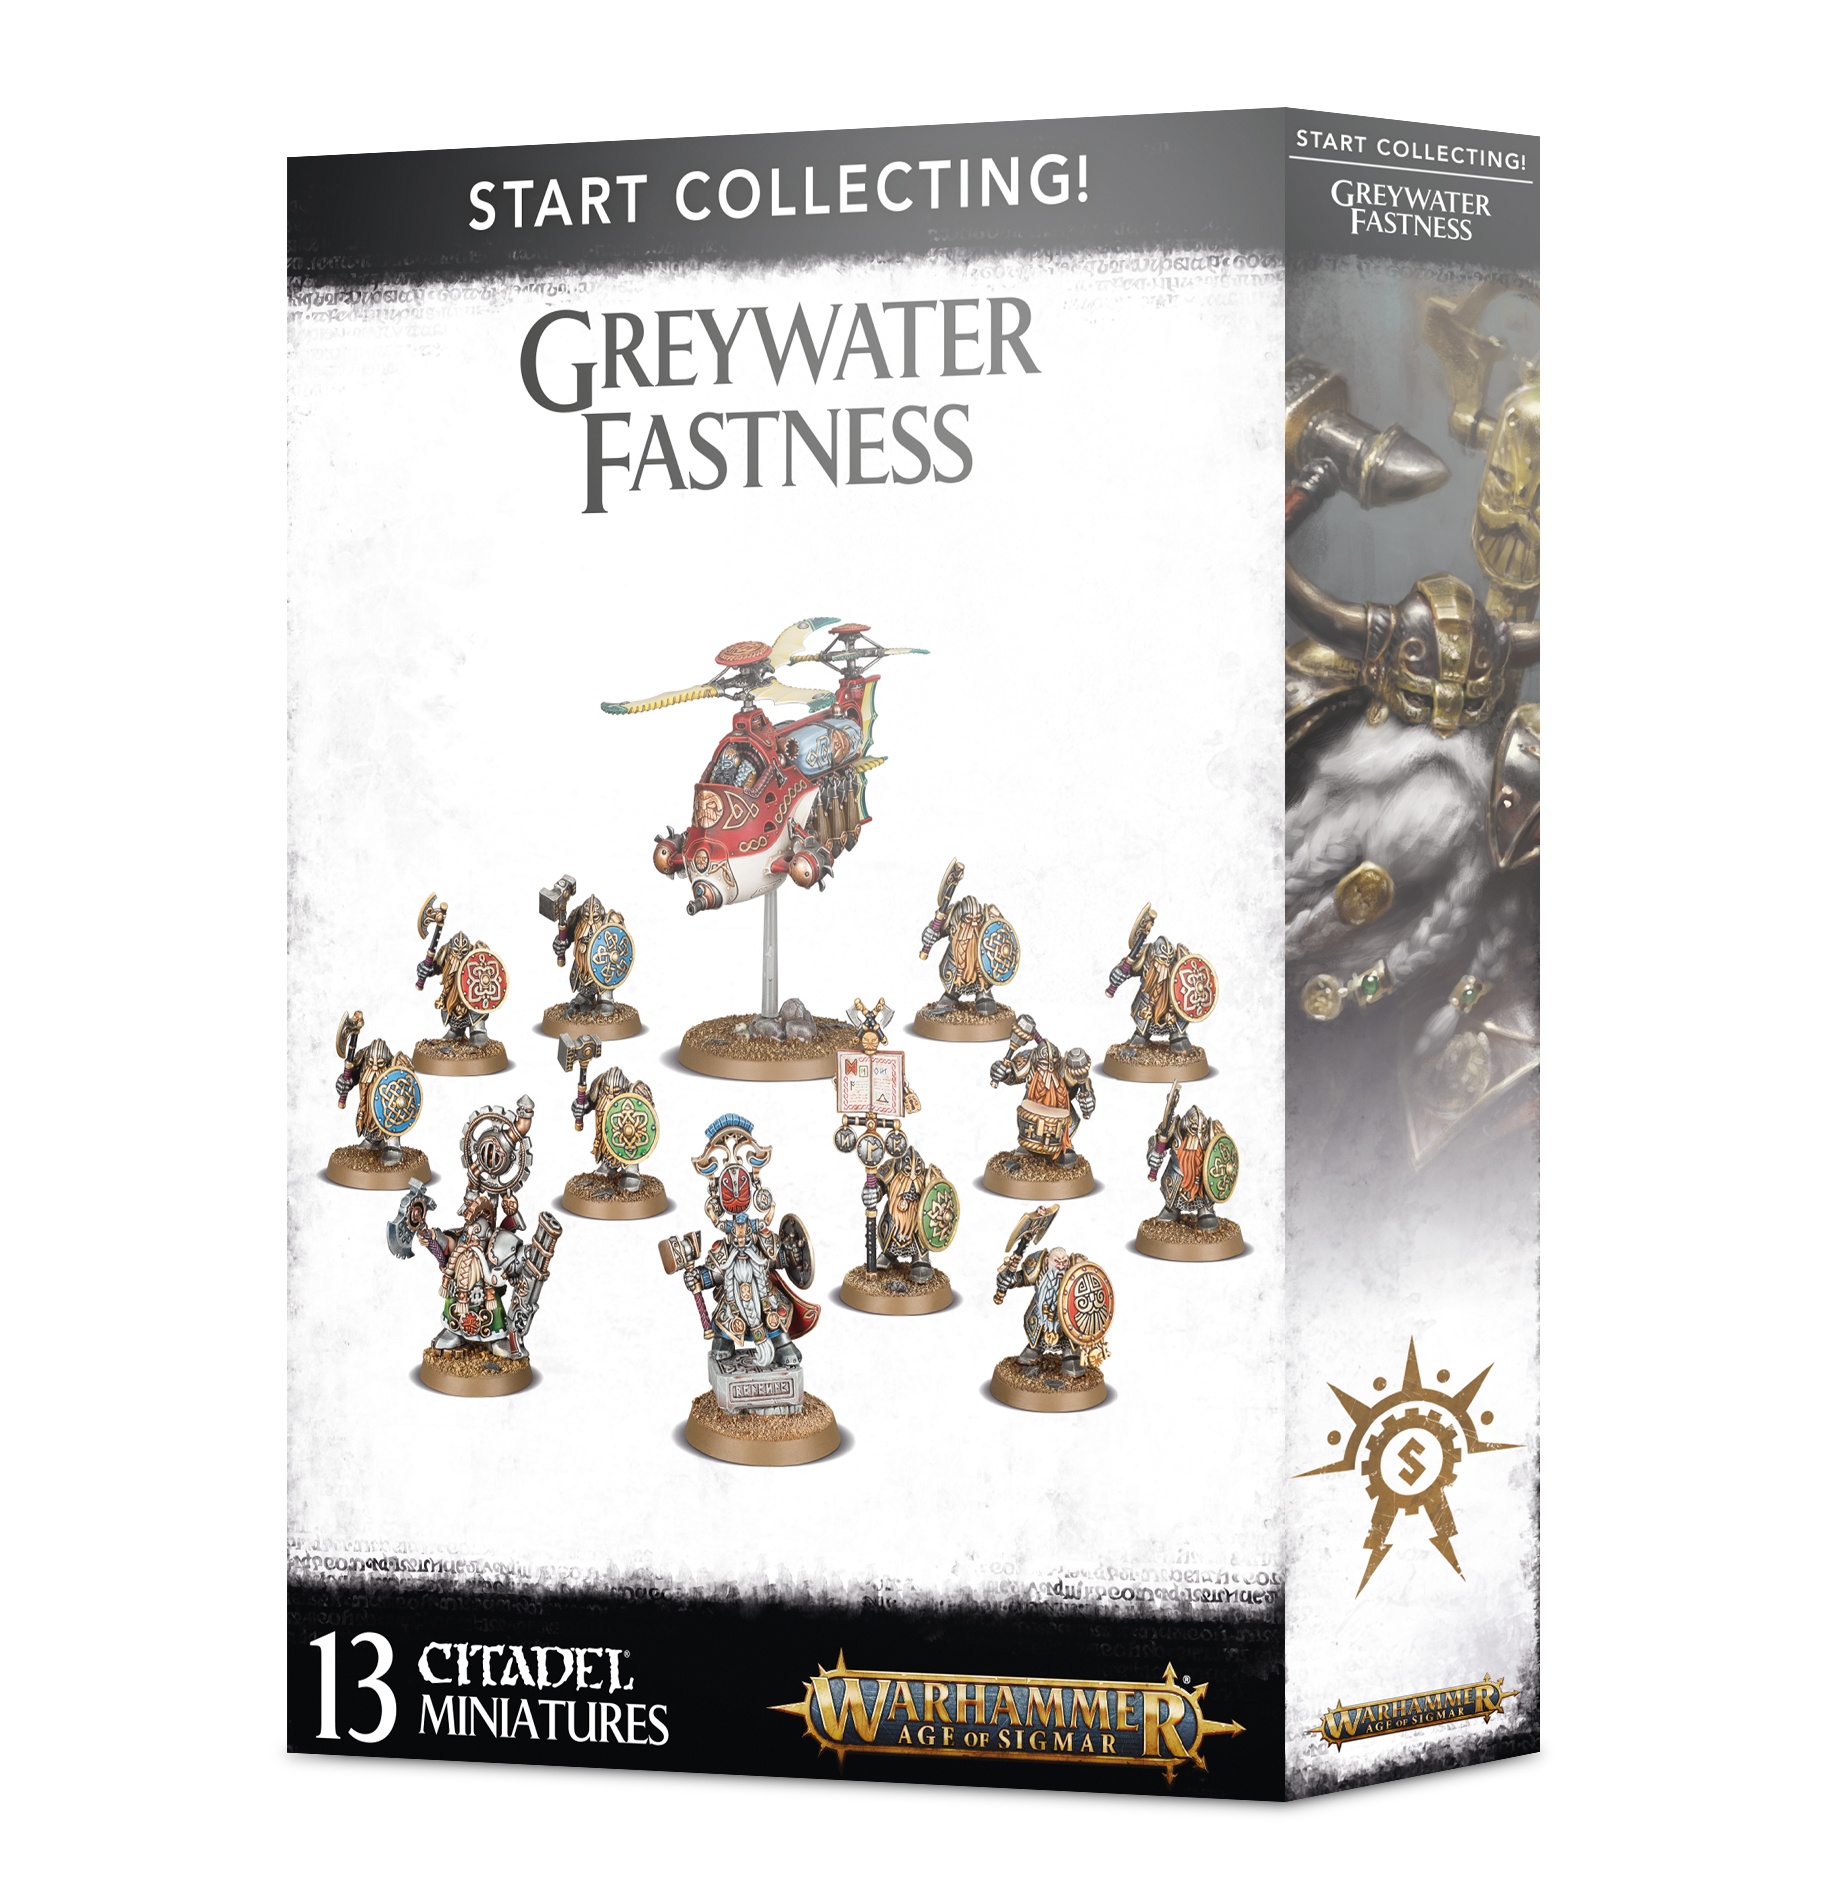 Start Collecting! Greywater Fastness - 70-71 - Warhammer Age of Sigmar